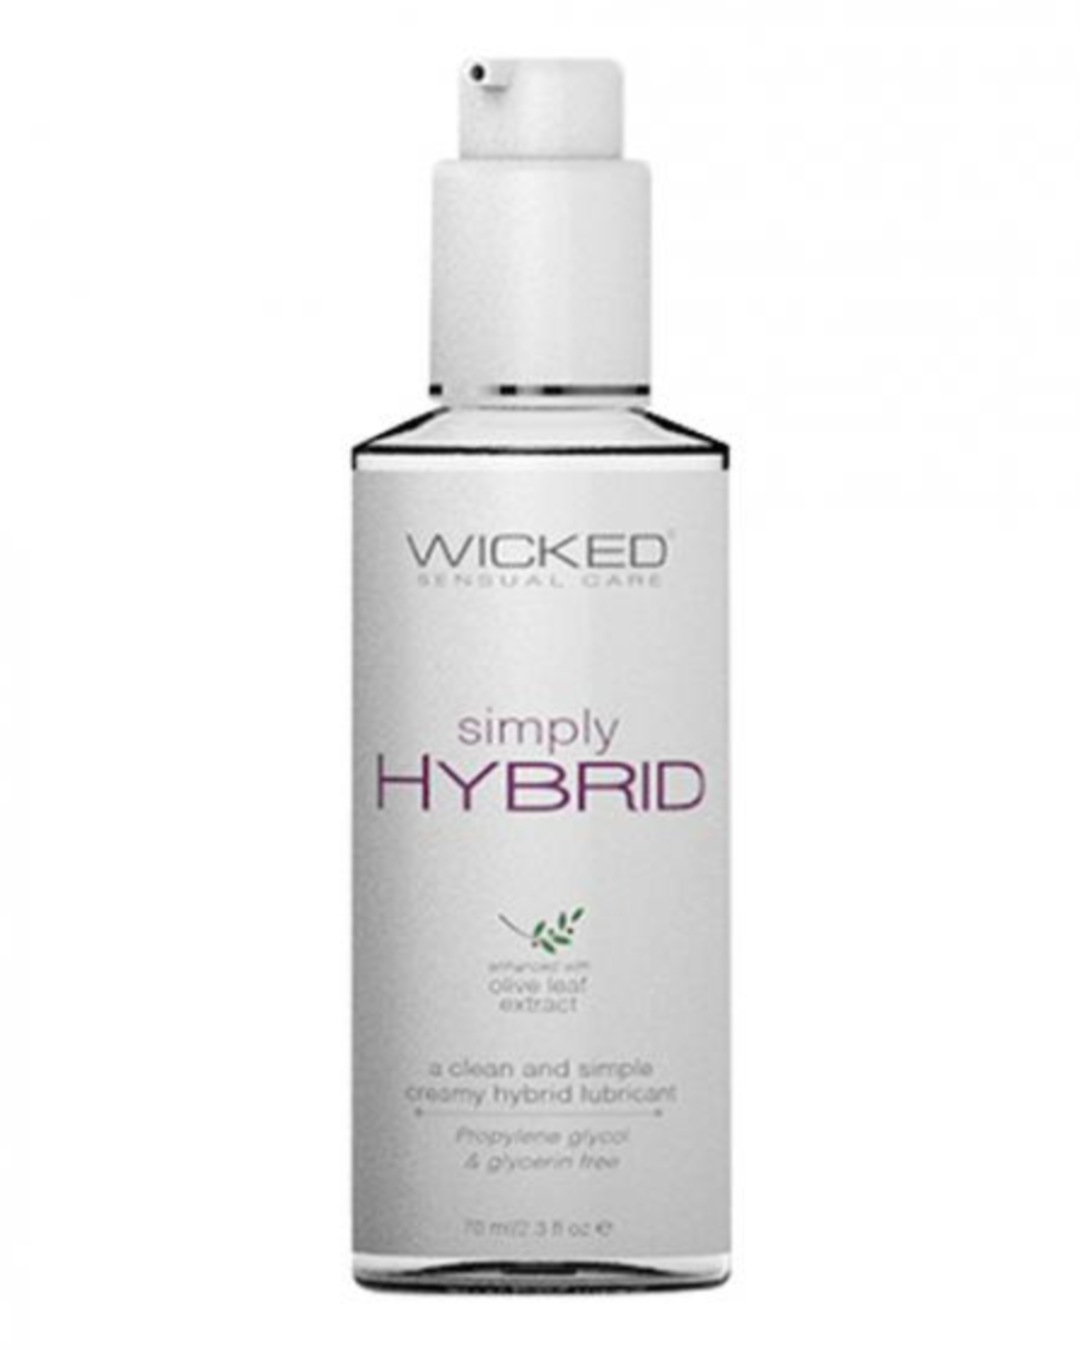 Wicked Simply Hybrid Lubricant 2.3 fl oz bottle close up 